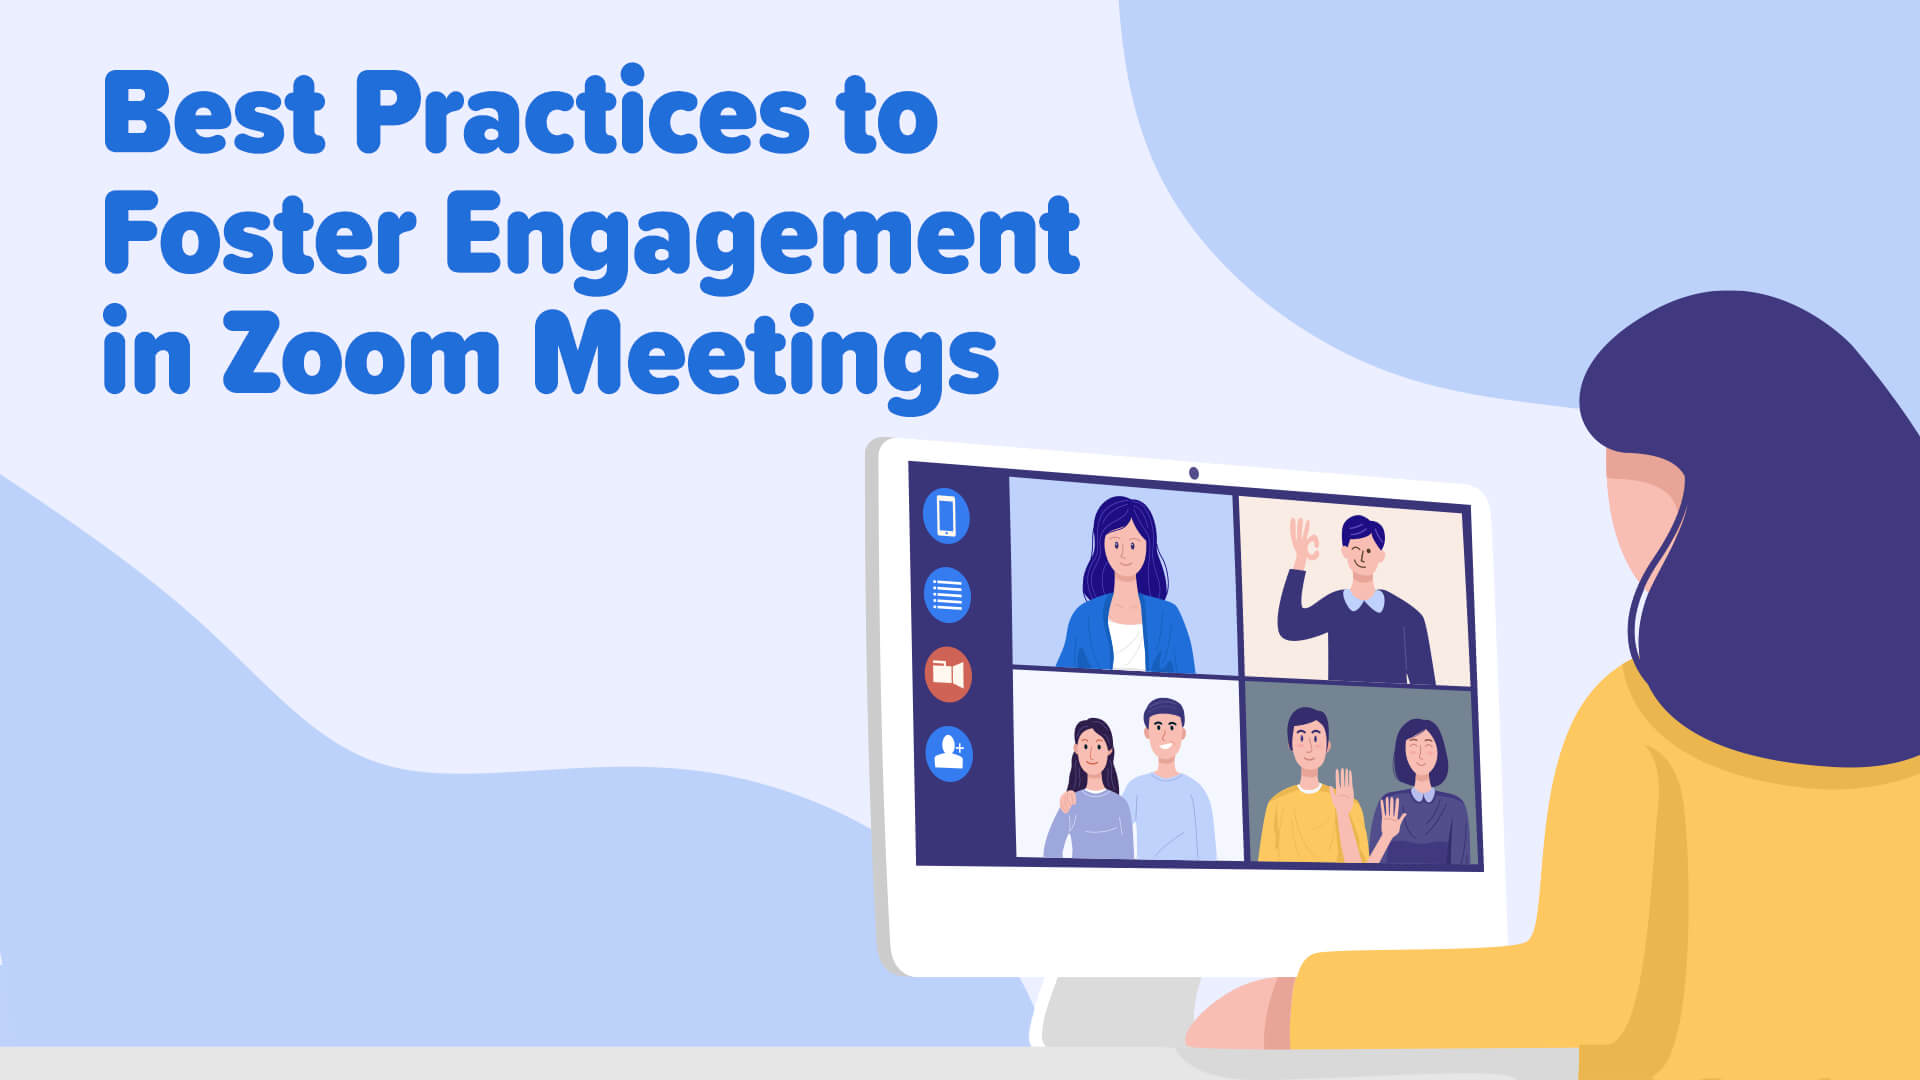 Best Practices to Engage Church Workers in Zoom Meetings